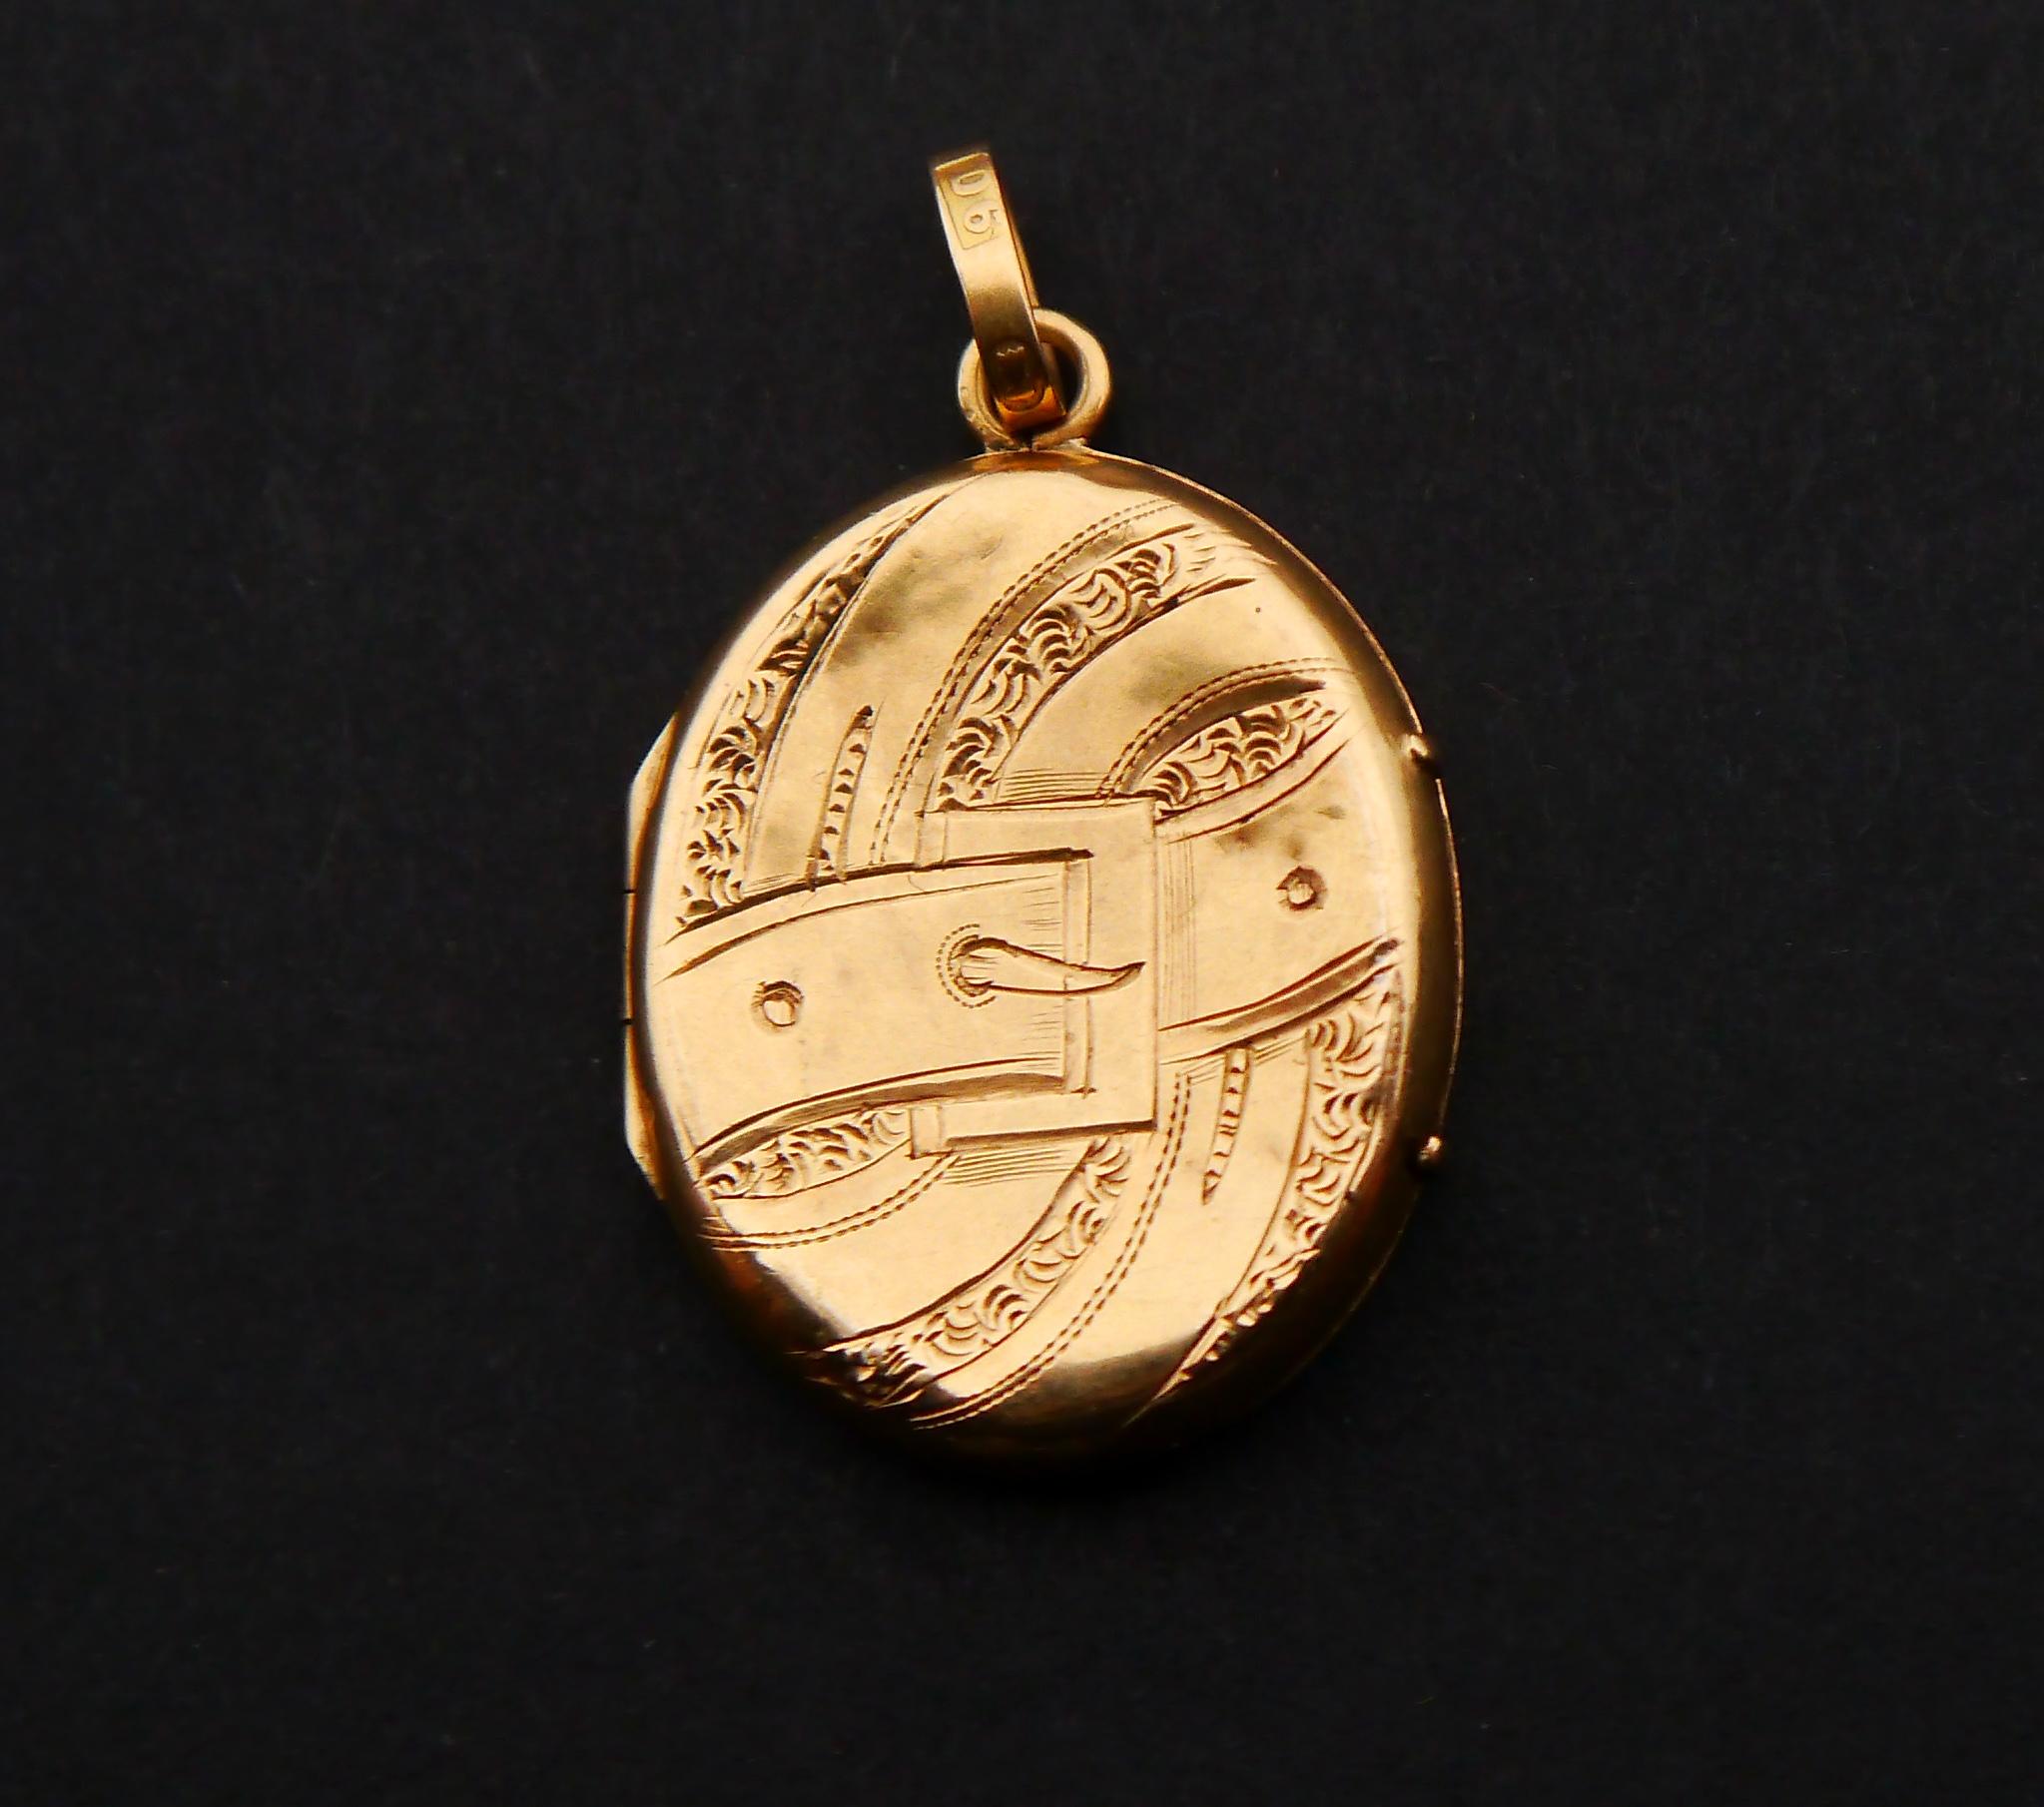 Antique Pendant / Locket made of solid 18K Yellow Gold. Miniature hand-engraved ornaments on both sides. Two internal removable bezels inside, no glass.

Swedish XIX cent hallmarks / 18K, Stockholm. Maker's marks, Stockholm.

Year hallmarks D6 =